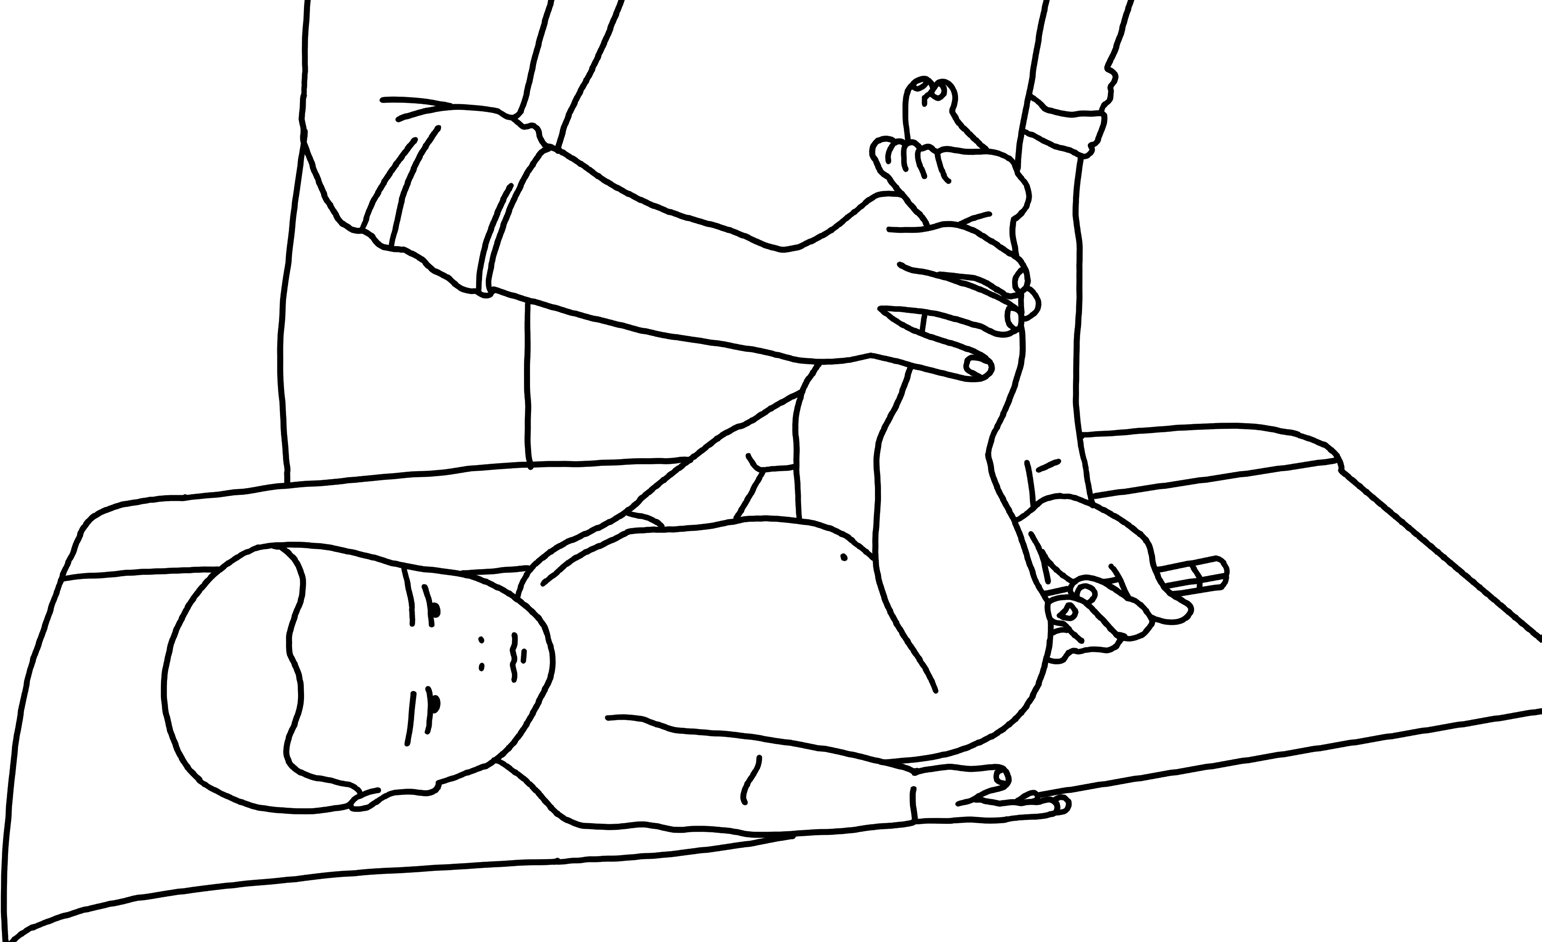 Diagram 20: Use petroleum jelly on rectal thermometer
      tip and gently insert into an infant’s rectum.